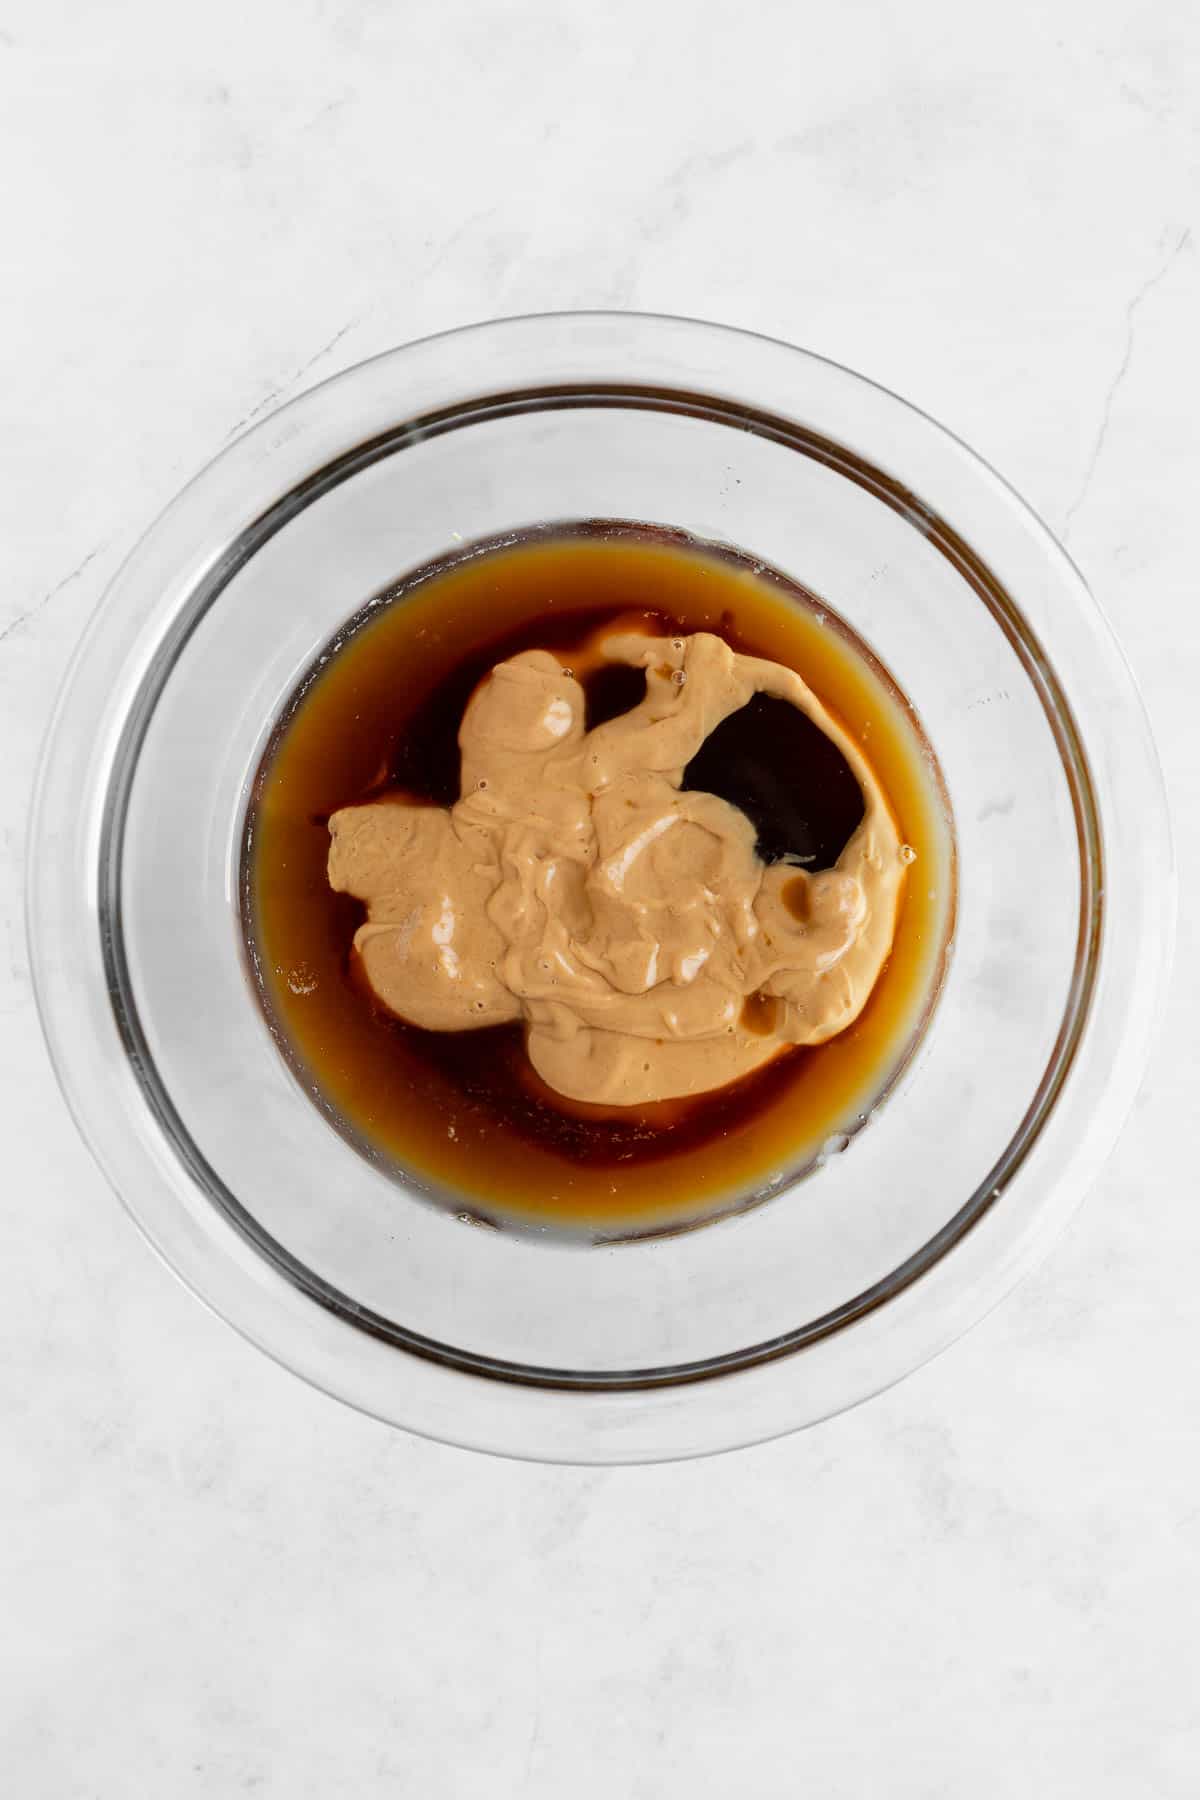 peanut butter, maple syrup, and coconut oil in a glass mixing bowl